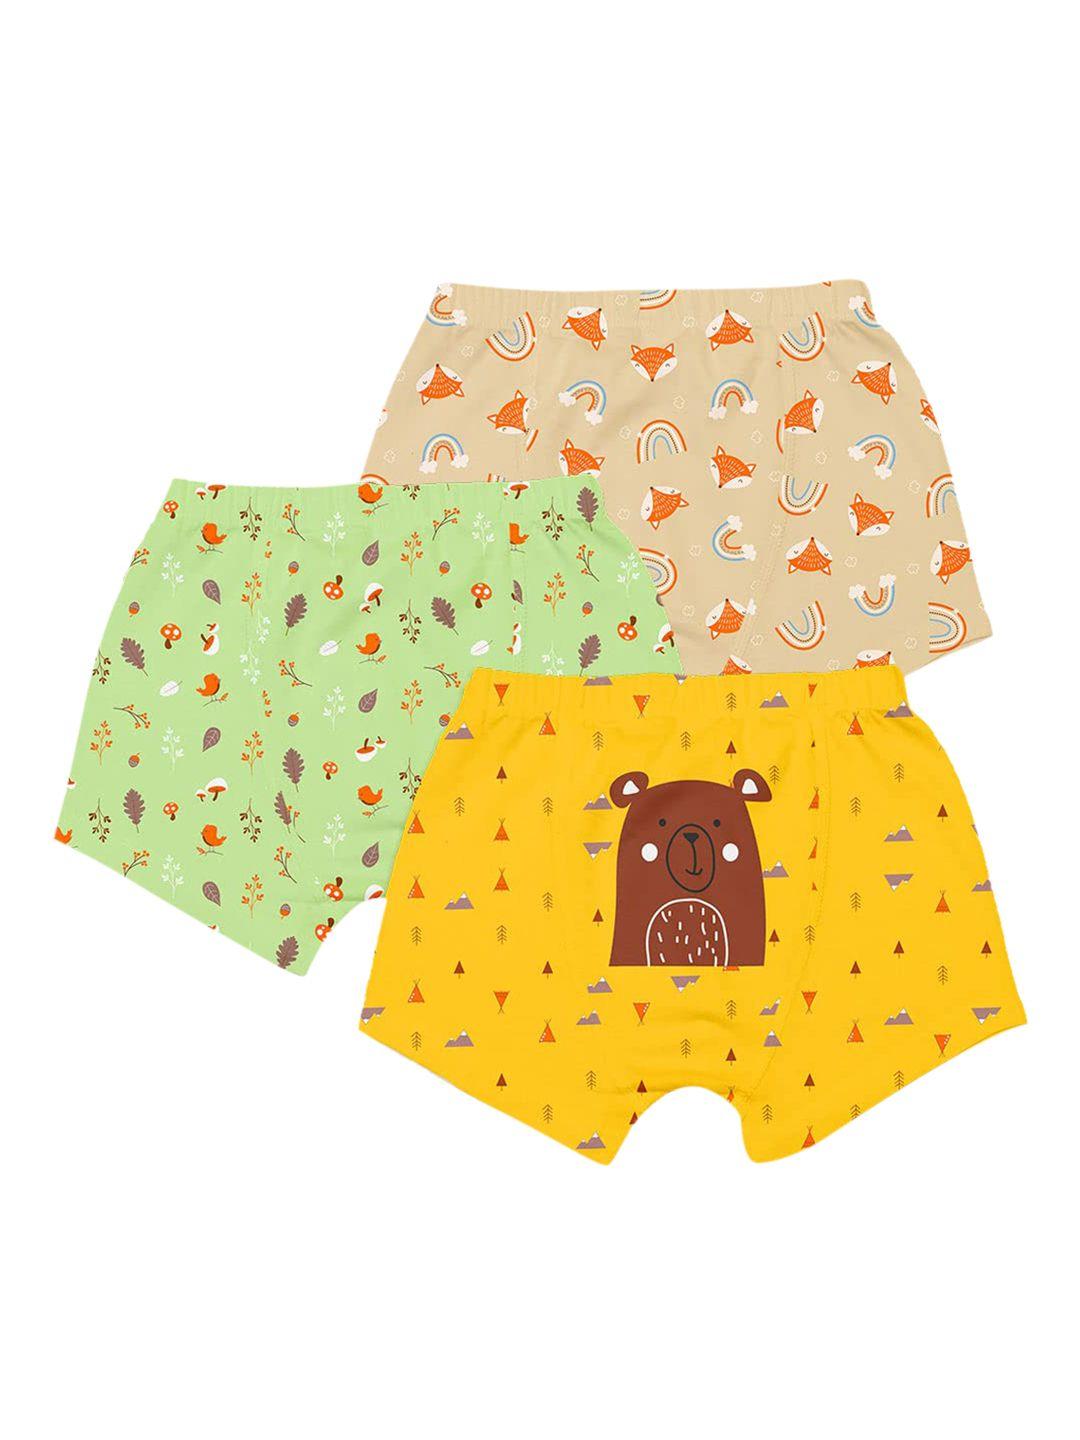 superbottoms boys pack of 3 printed sustainable trunks und-m-tr-wg-6_8